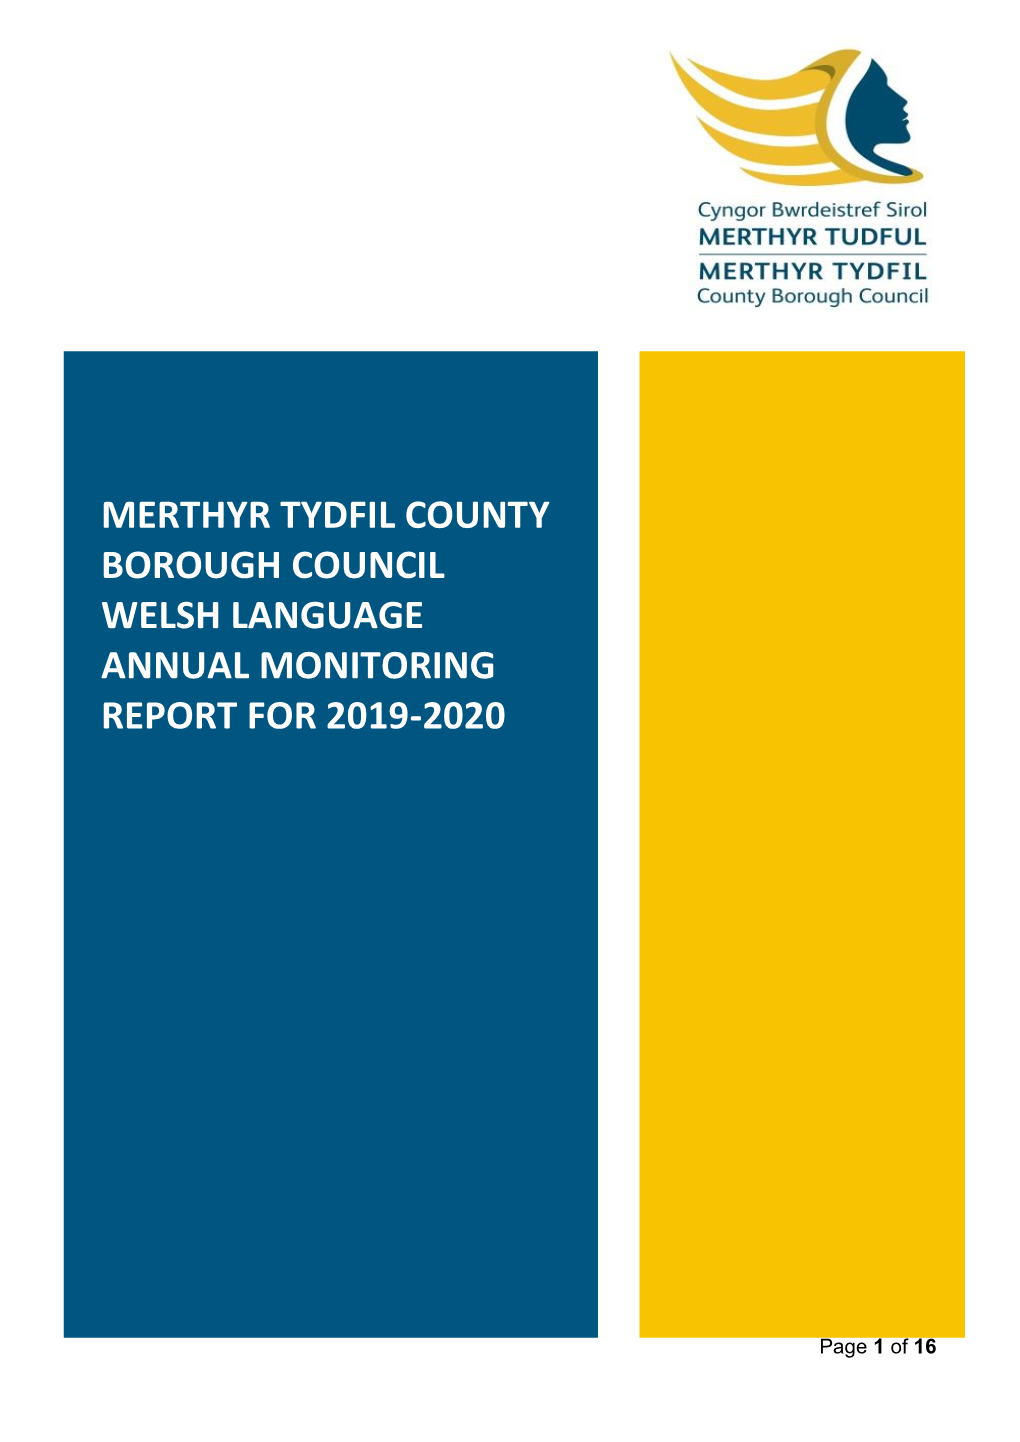 Merthyr Tydfil County Borough Council Welsh Language Annual Monitoring Report for 2019-2020